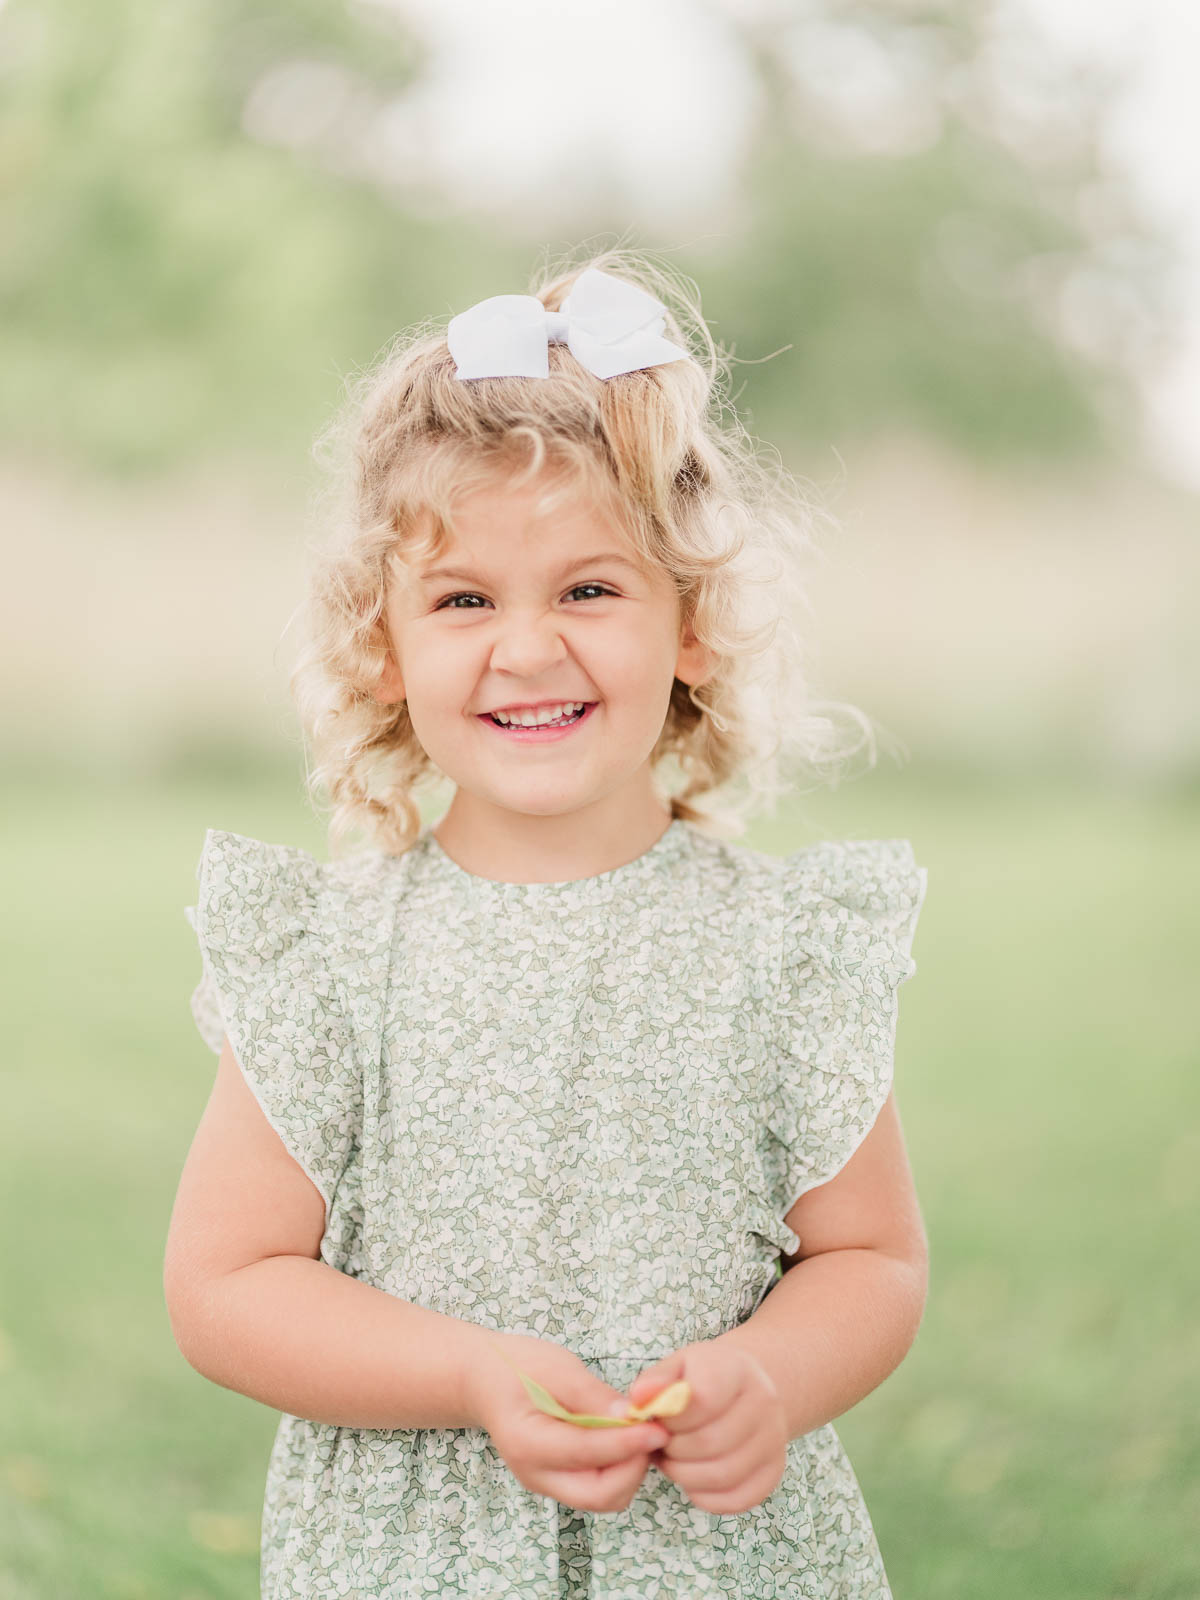 Childrens Photography Sample Gallery - Child Portraits